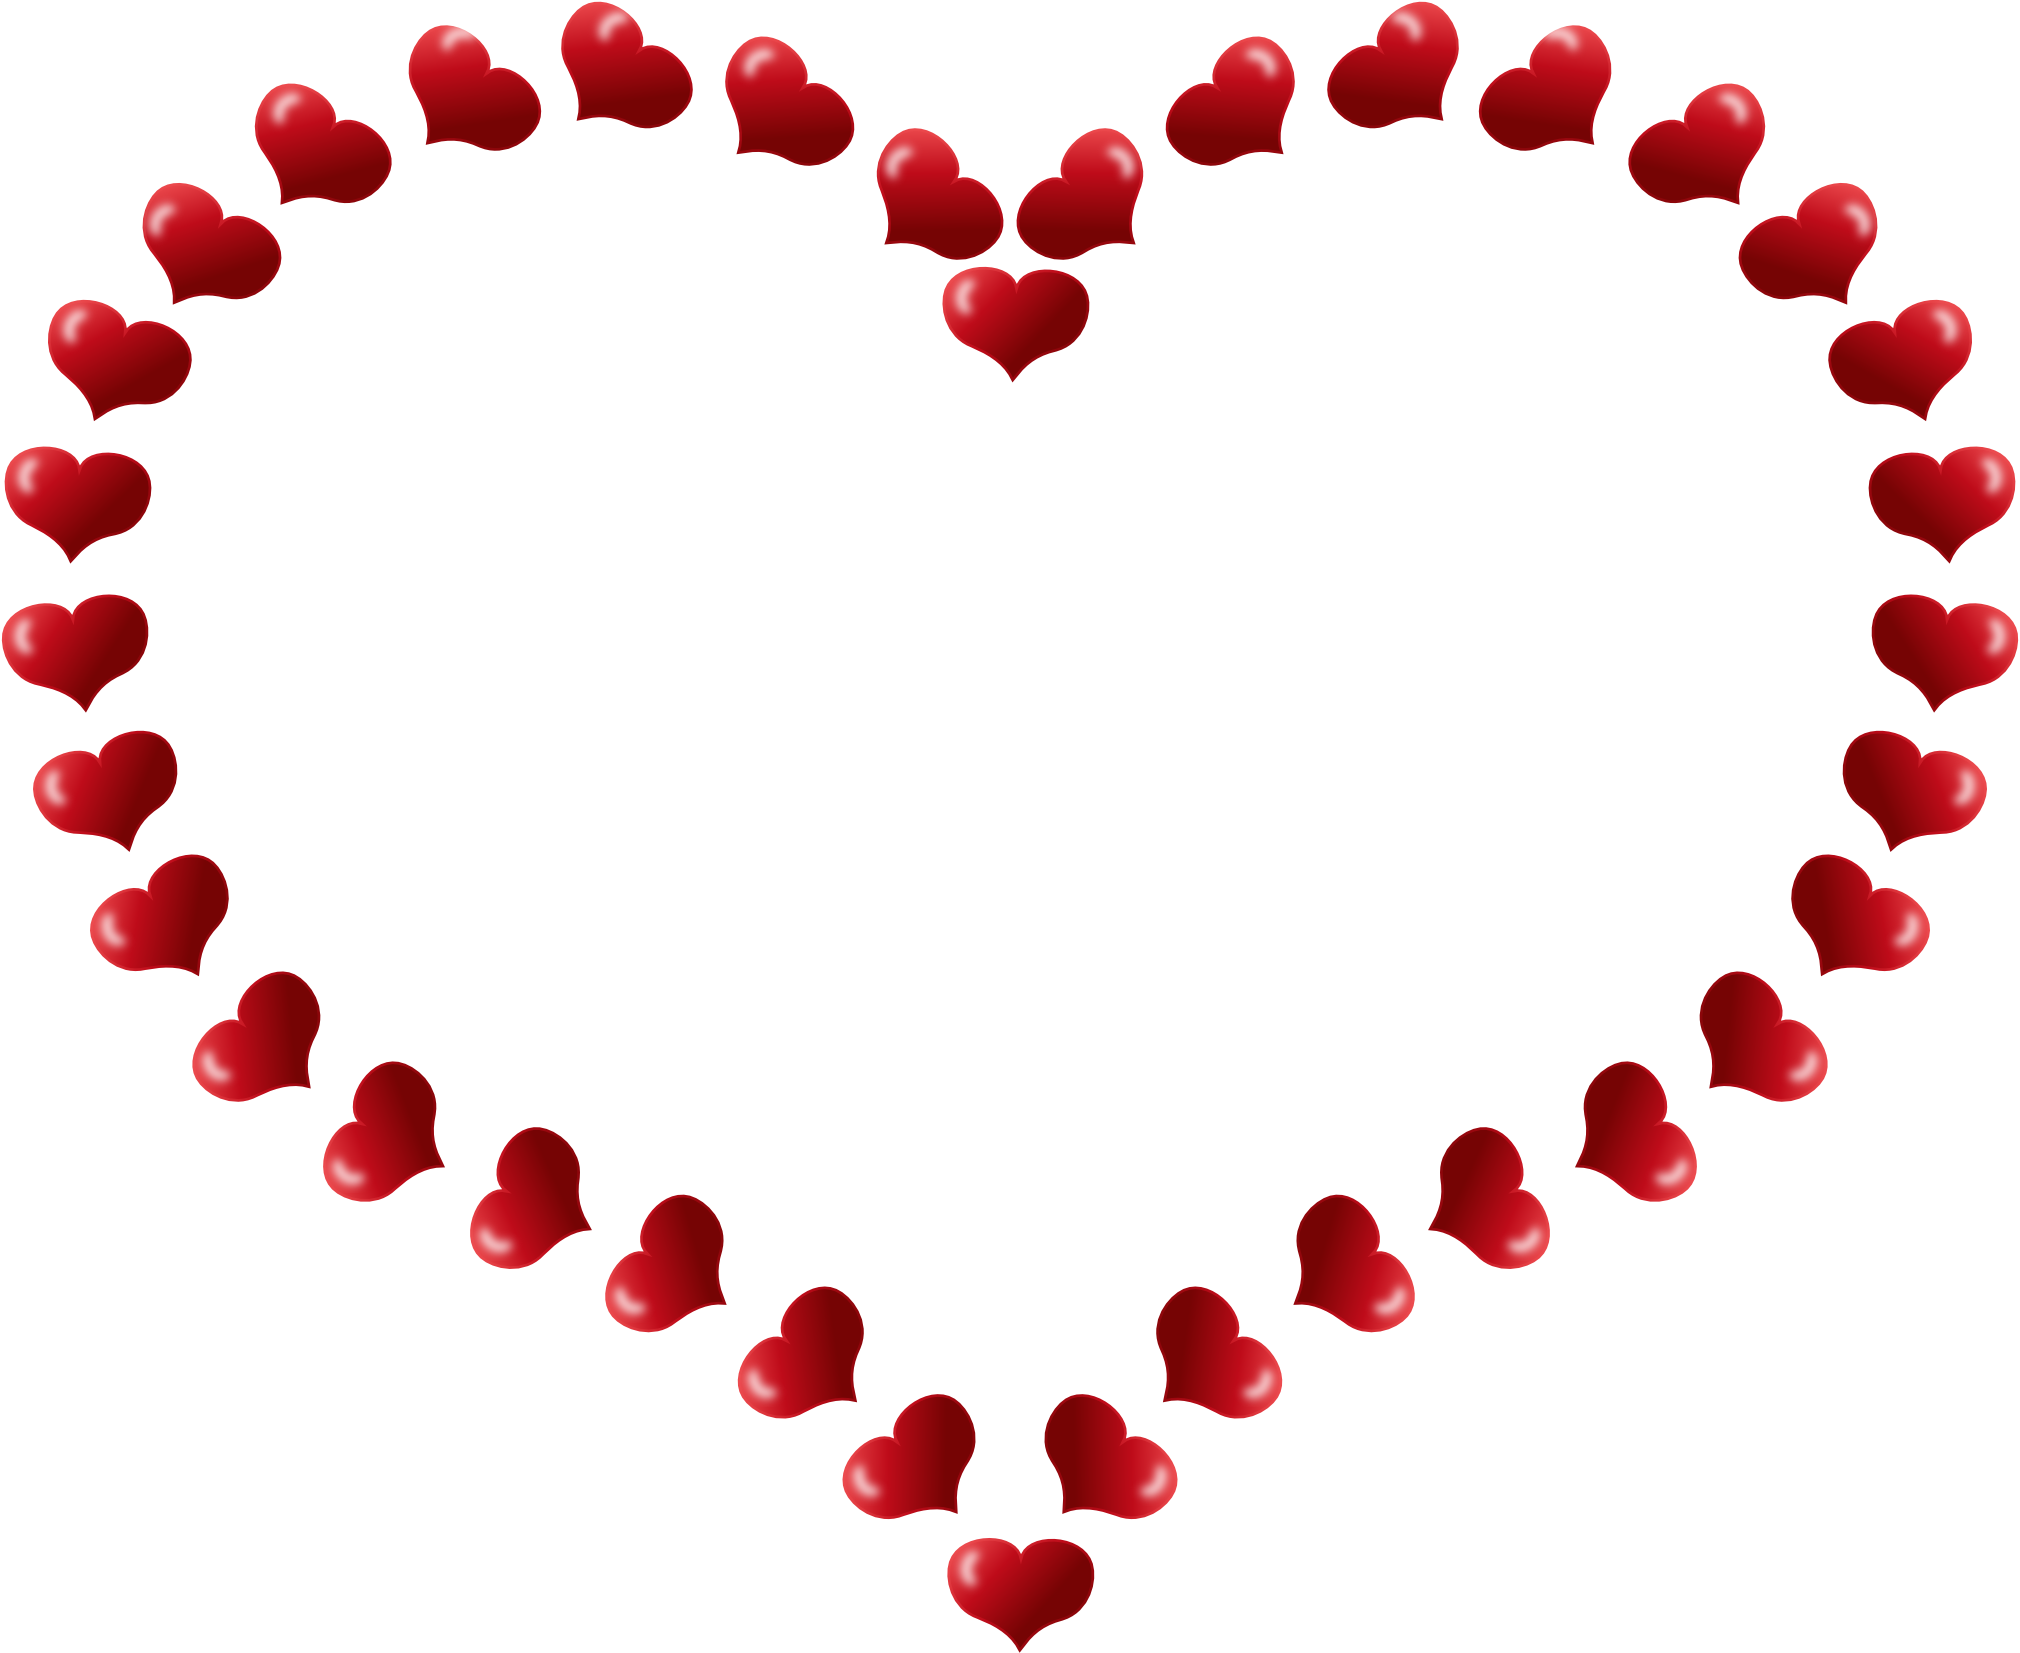 Heart Shapes Clip Art - Clipart library